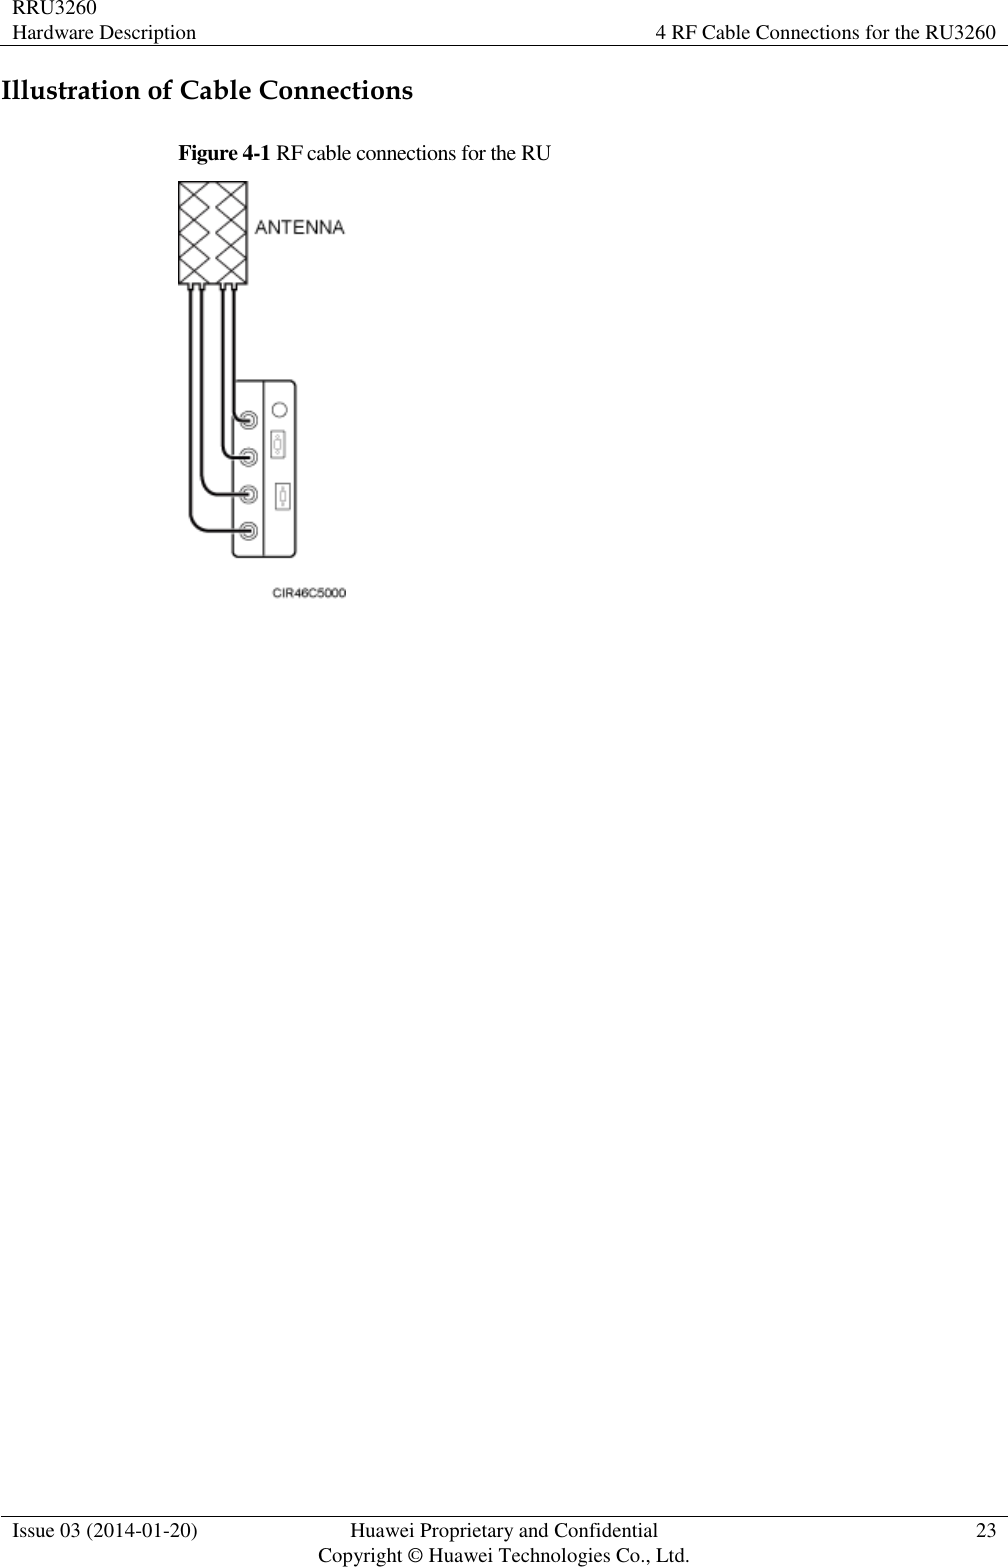 RRU3260 Hardware Description 4 RF Cable Connections for the RU3260  Issue 03 (2014-01-20) Huawei Proprietary and Confidential                                     Copyright © Huawei Technologies Co., Ltd. 23  Illustration of Cable Connections Figure 4-1 RF cable connections for the RU  